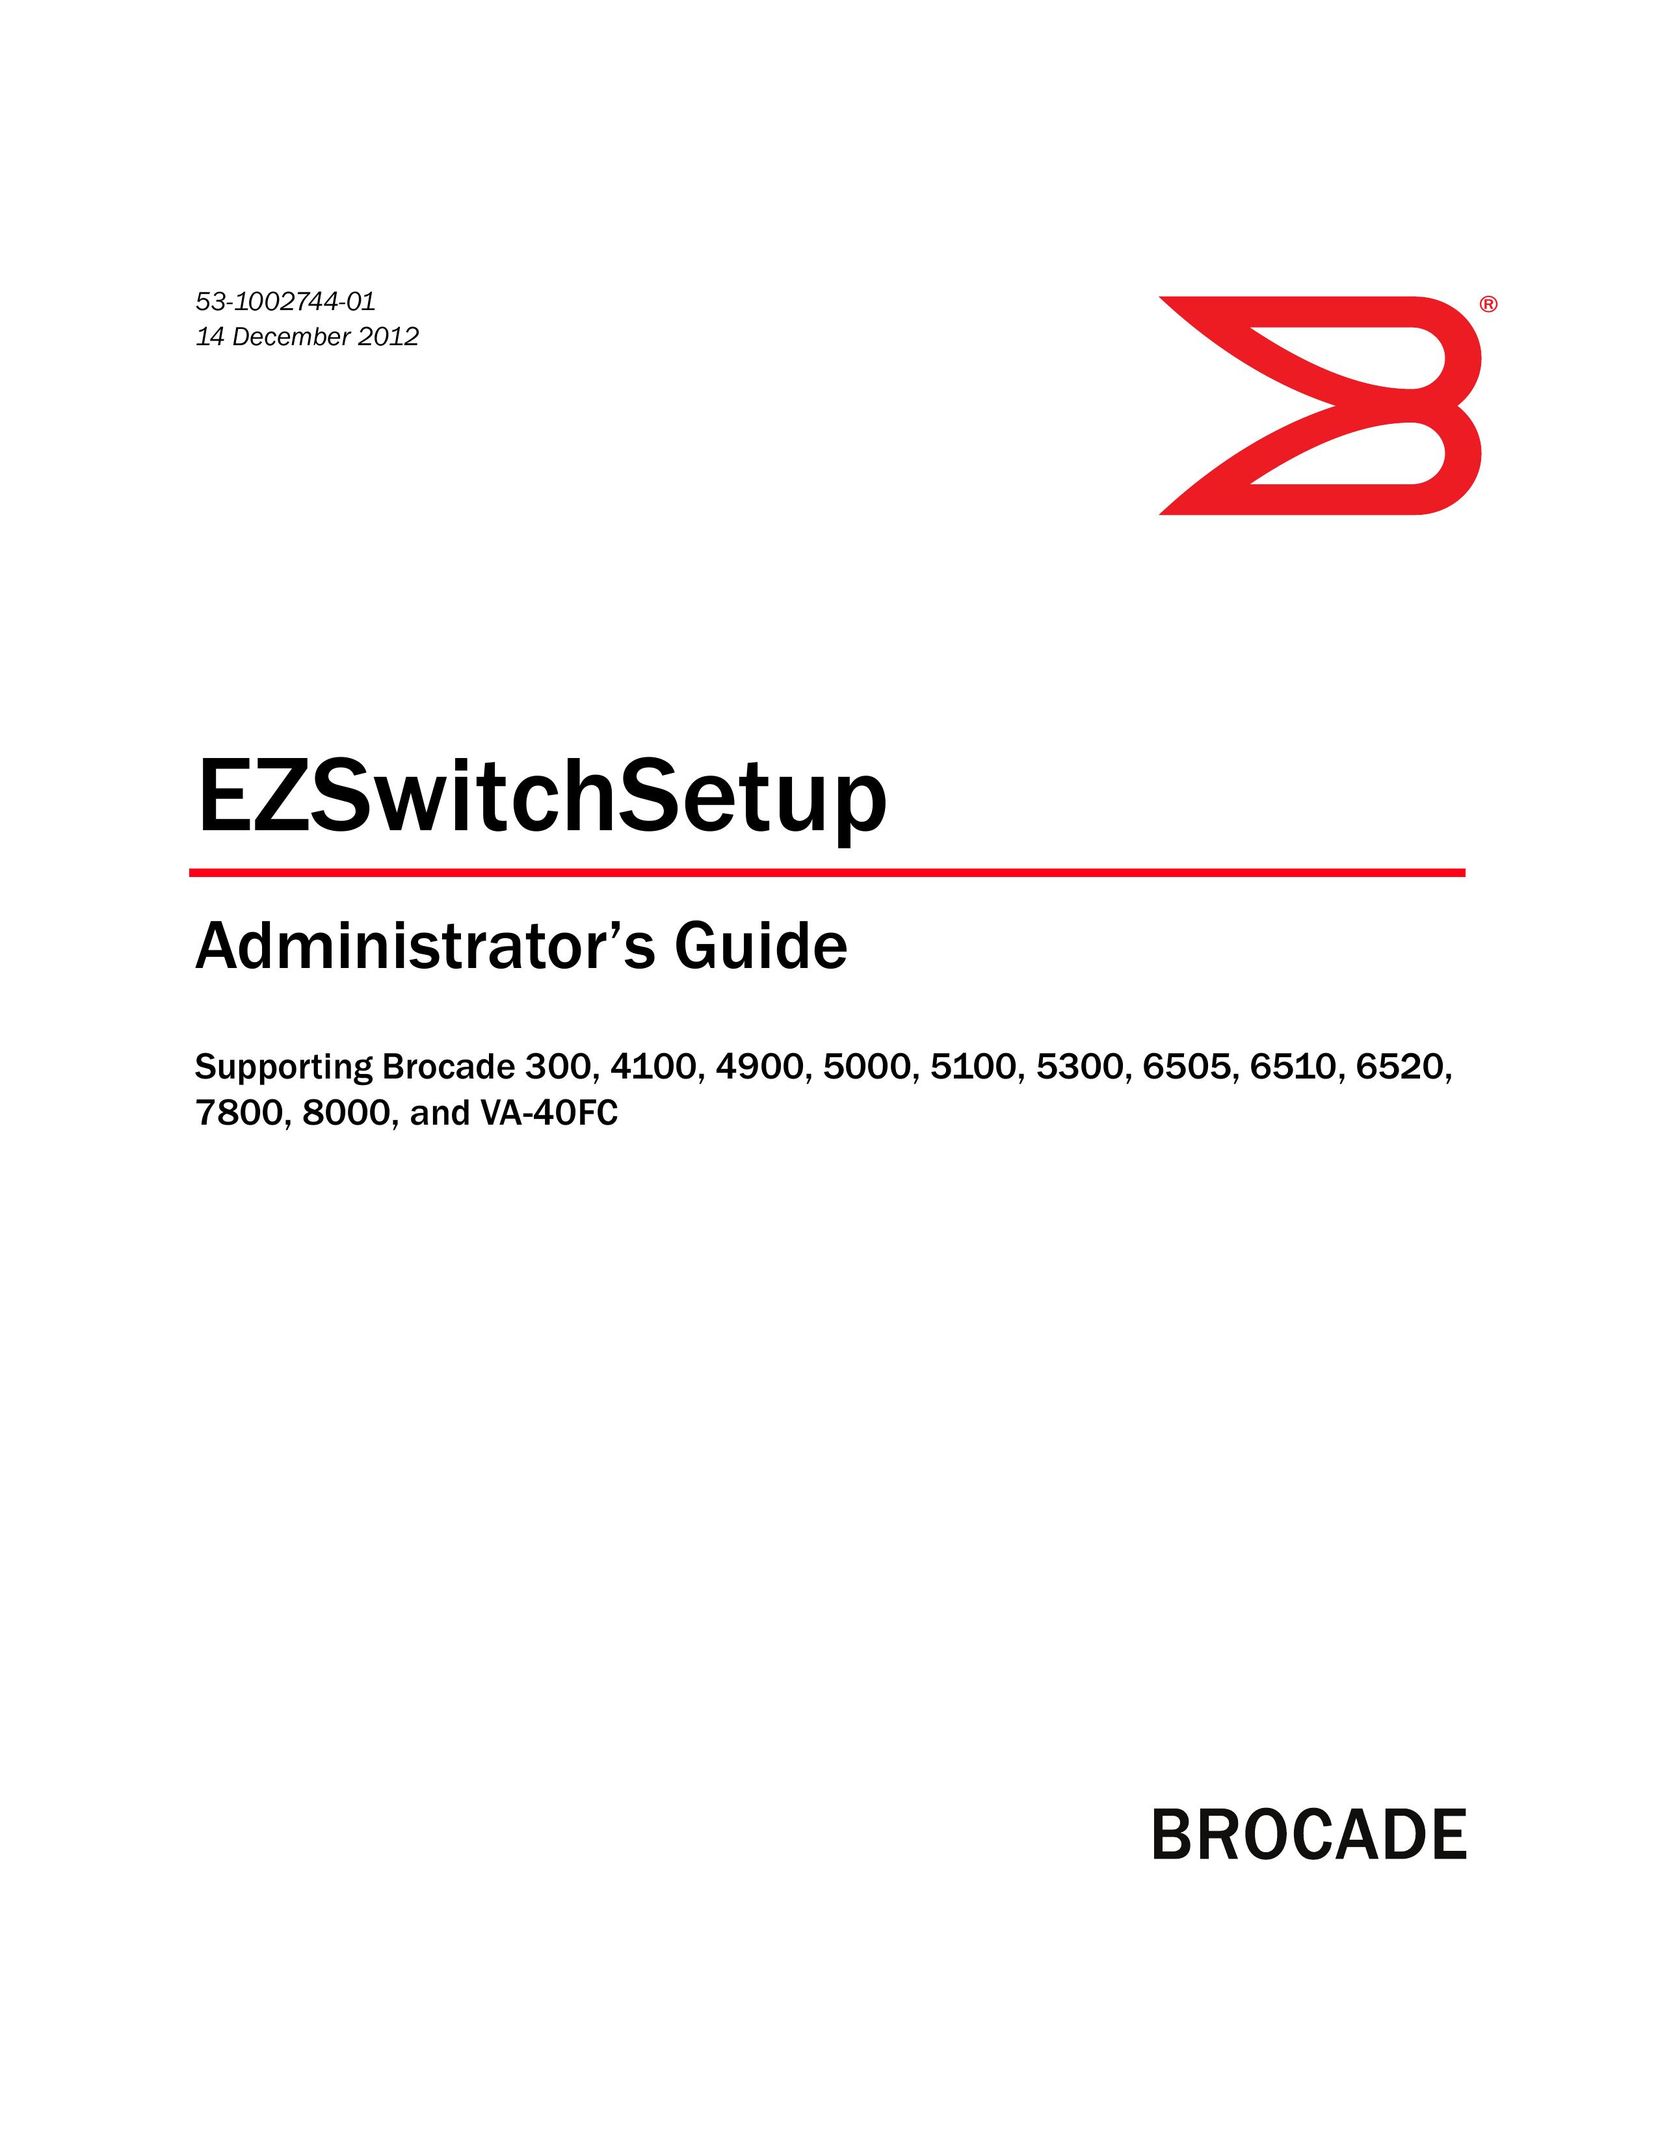 Brocade Communications Systems 6520 Switch User Manual